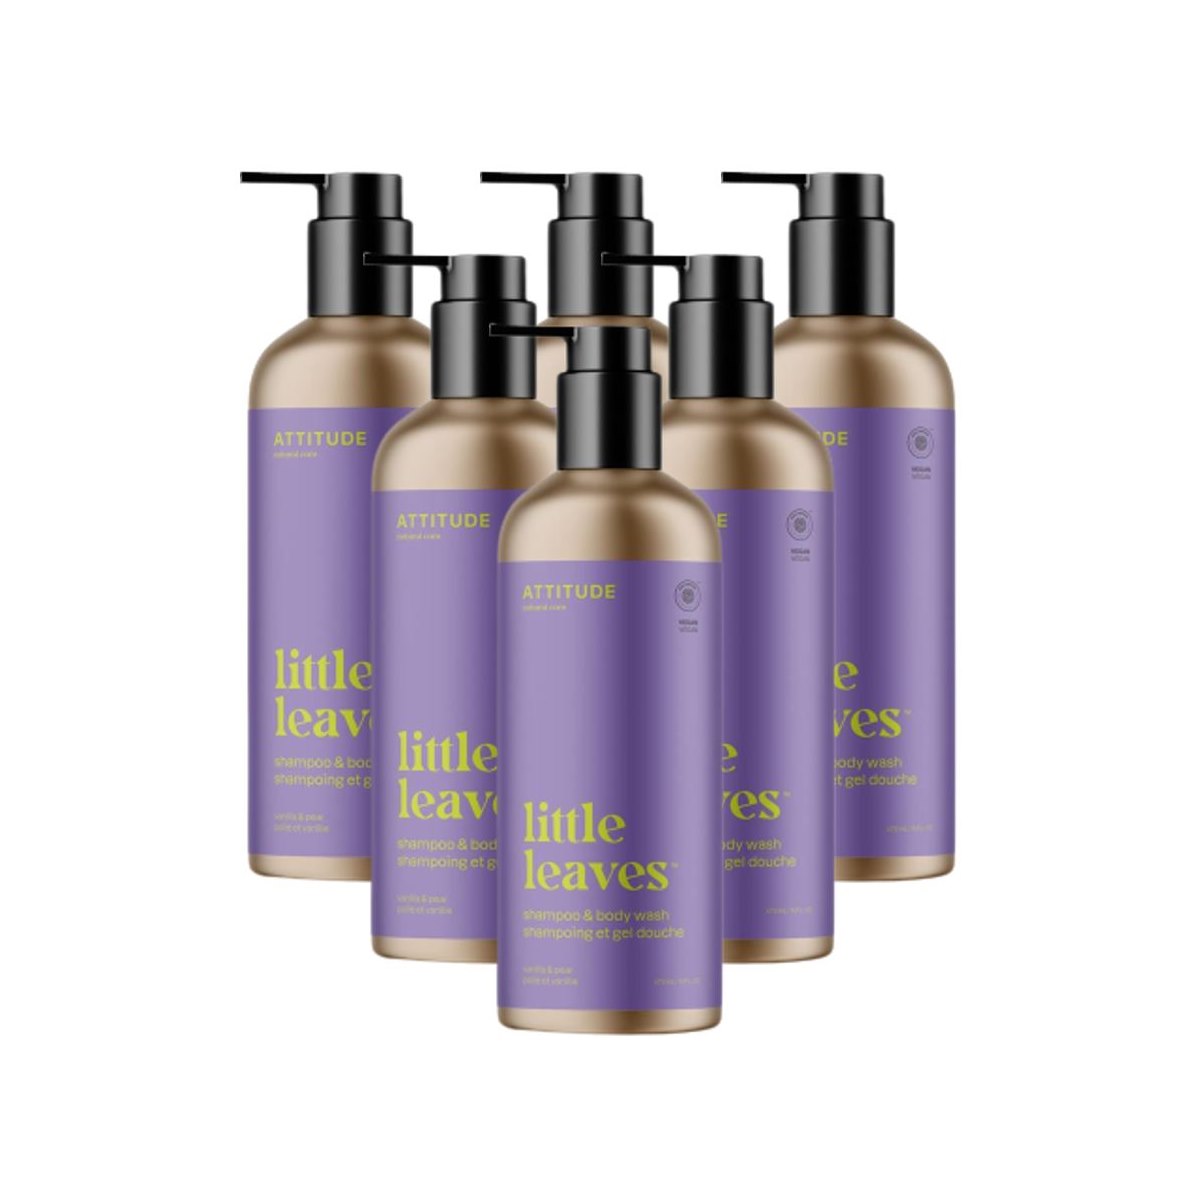 Case of 6 x Attitude Little Leaves Essential 2in1 Shampoo and Body Wash - Vanilla and Pear 473ml